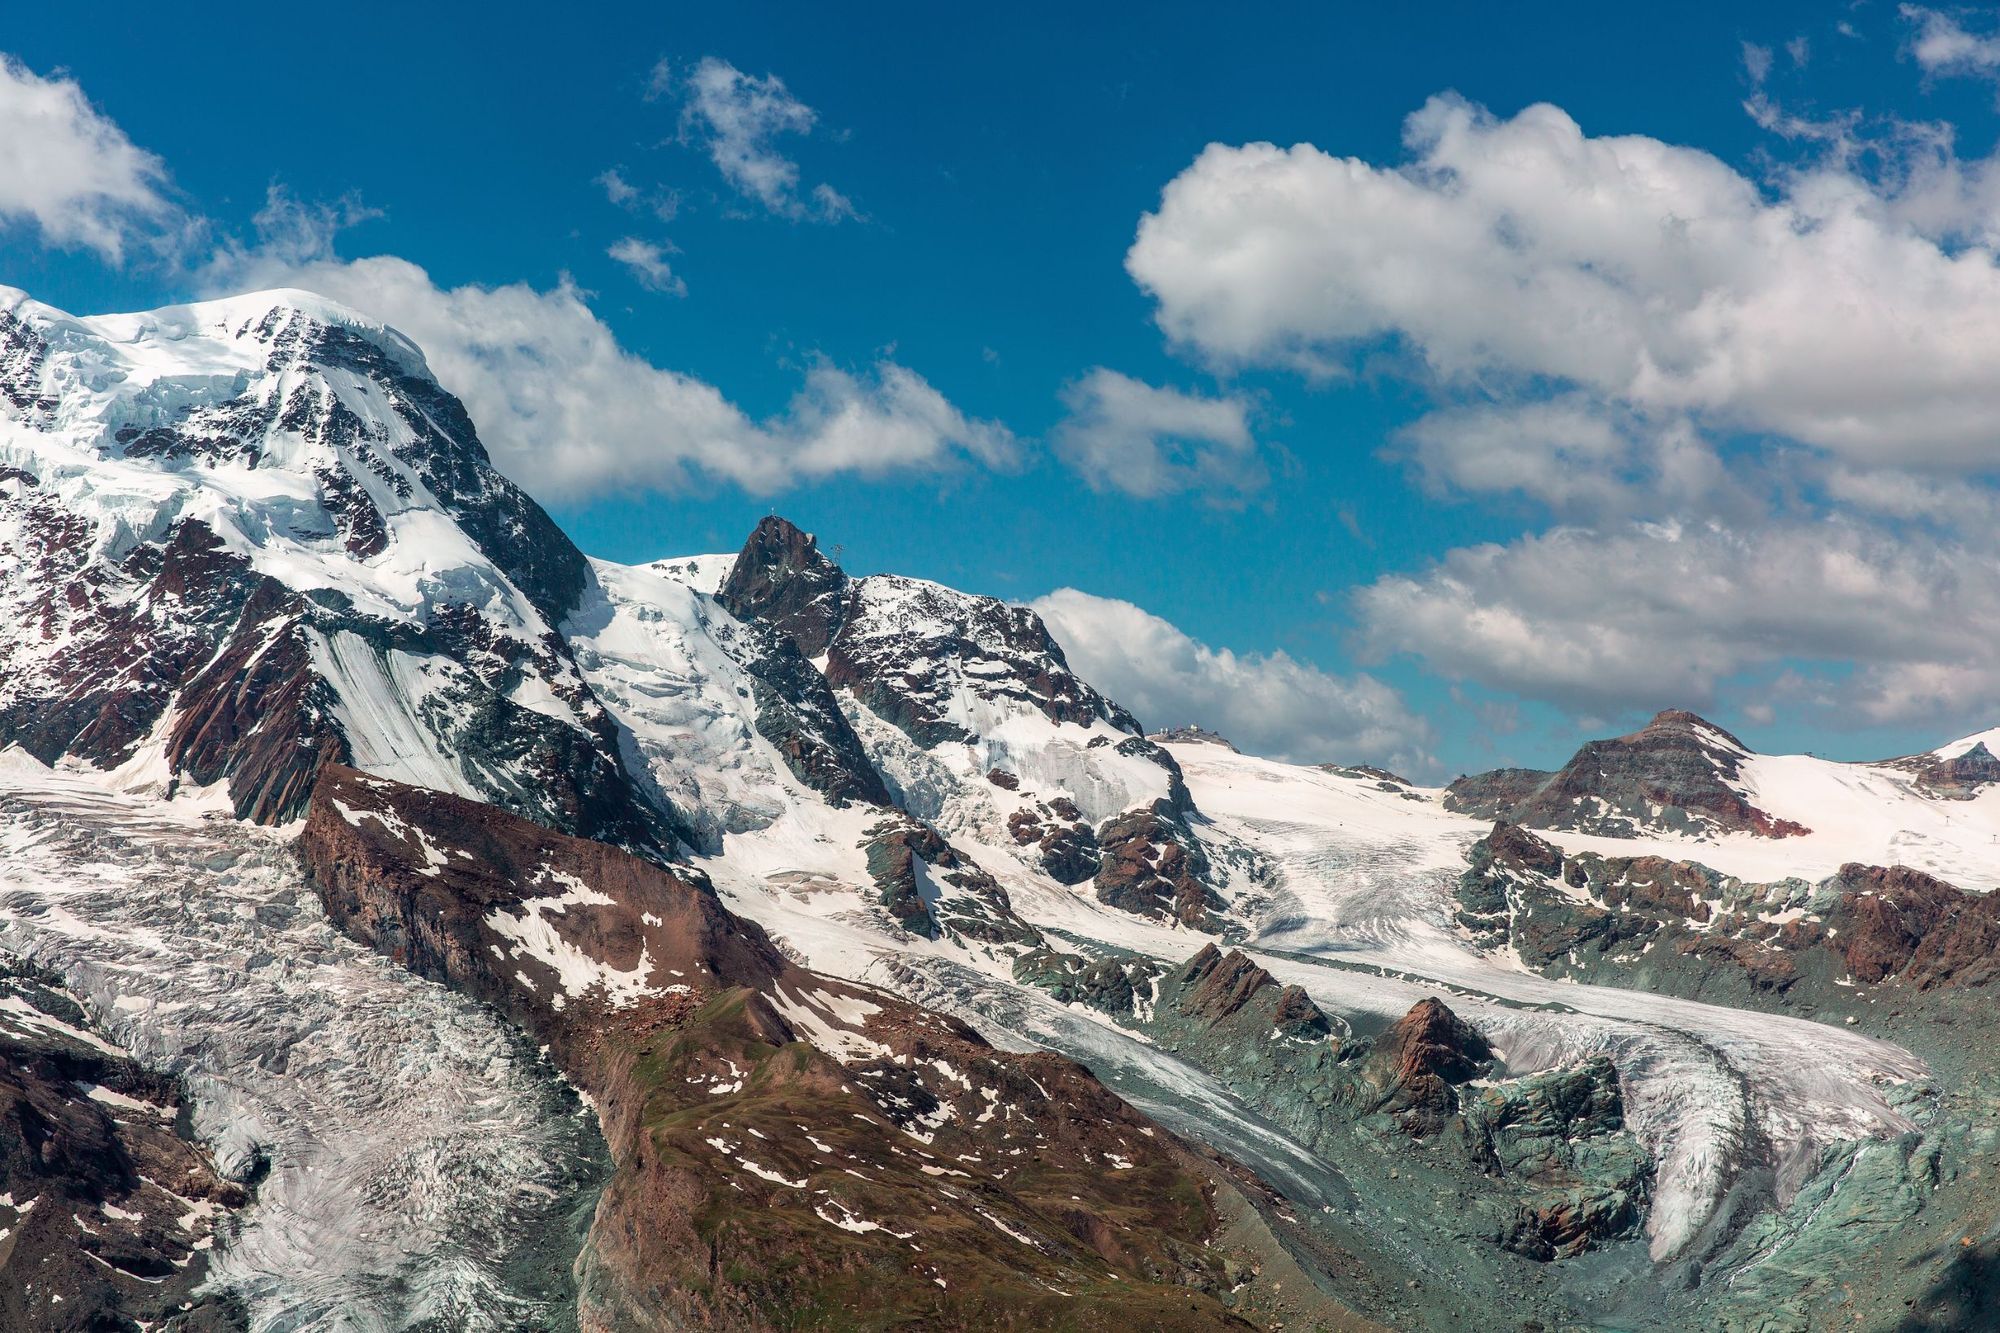 A view of Breithorn Peak and the Theodul Glacier, which you cross on the Tour of Monte Rosa. Photo: Getty